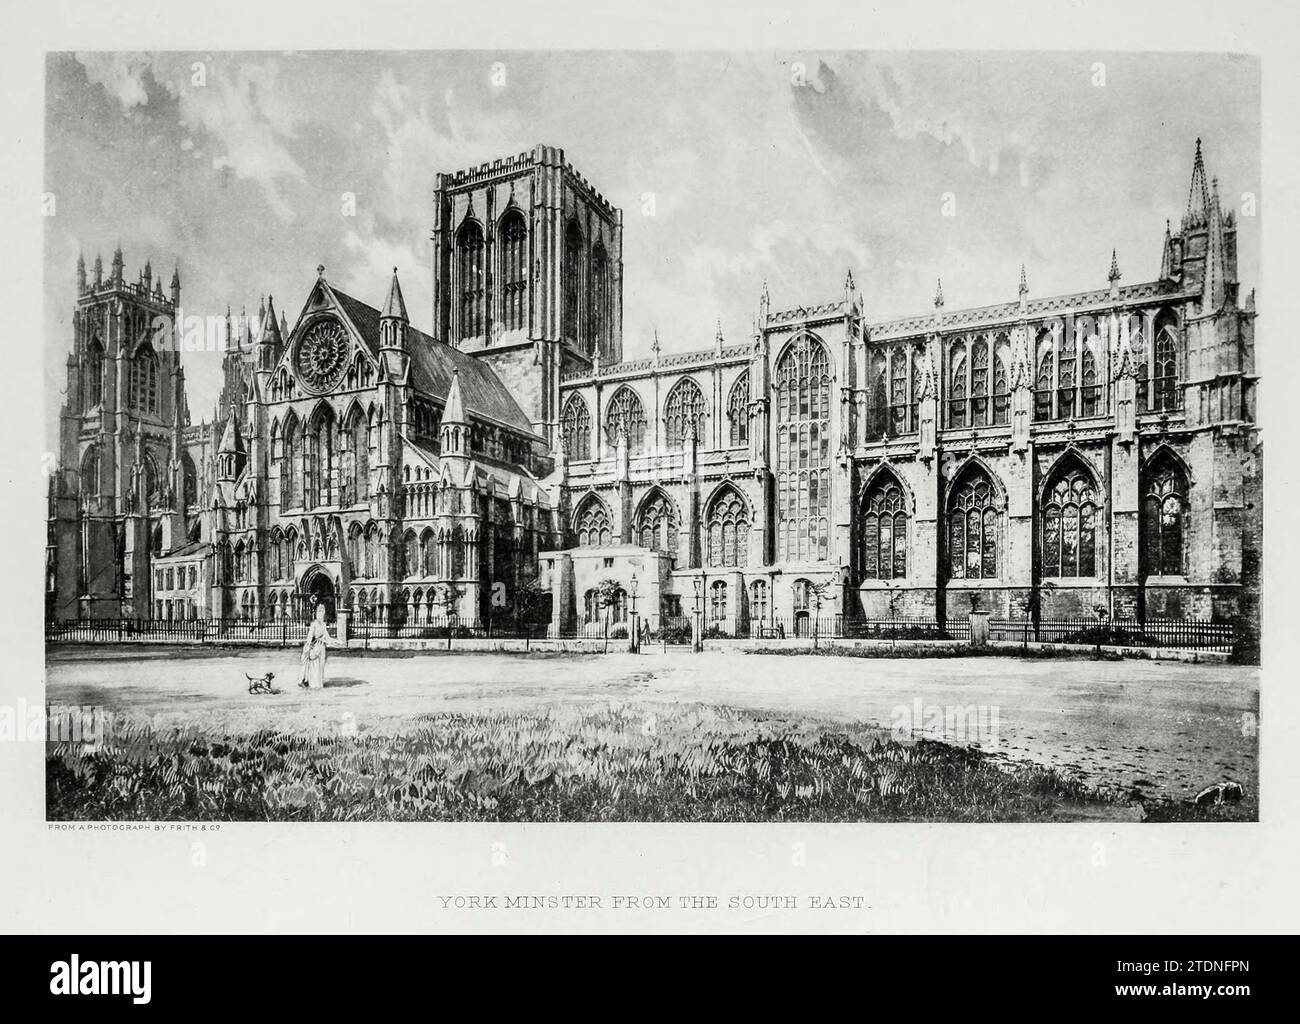 York Minster from the South East aus dem Buch Cathedrals, Abbeys and Church of England and Wales: Deskriptive, Historical, Pictorial Band 1 von Bonney, T. G. (Thomas George), 1833–1923; Publisher London: Cassell 1890 Stockfoto